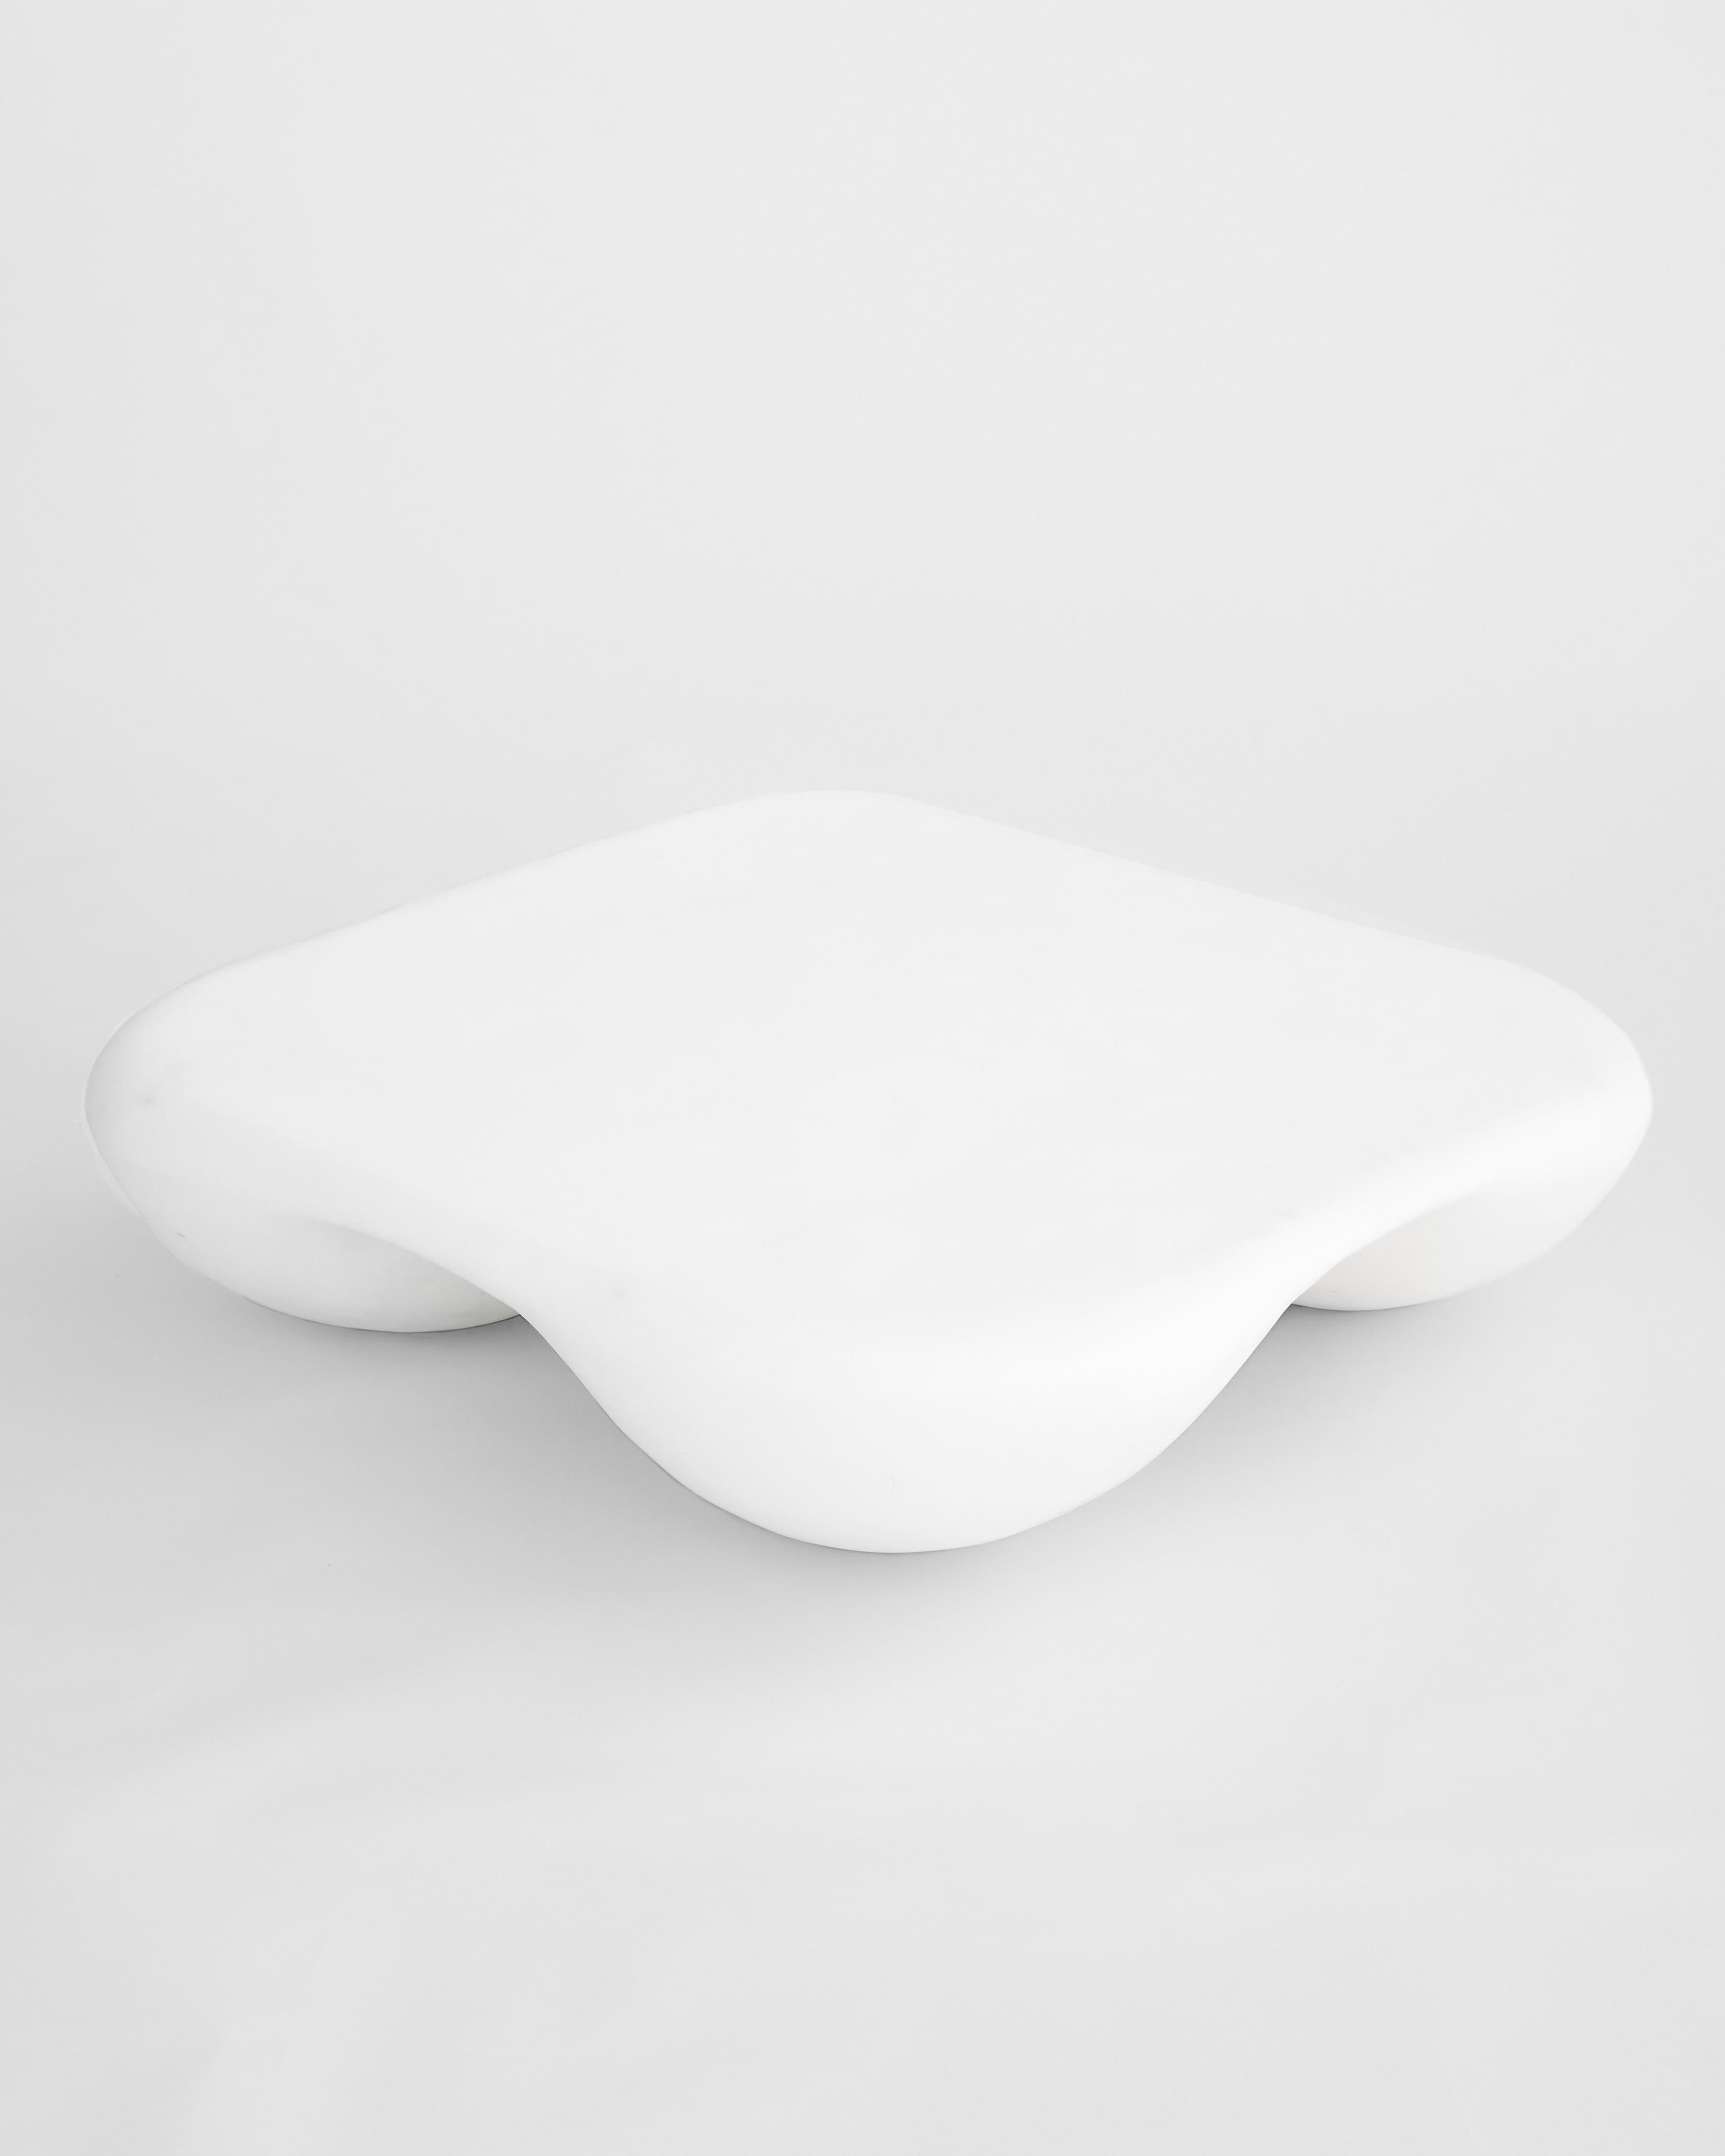 Modern White Rounded Square Quad Coffee Table in Stone Composite by Mike Ruiz-Serra For Sale